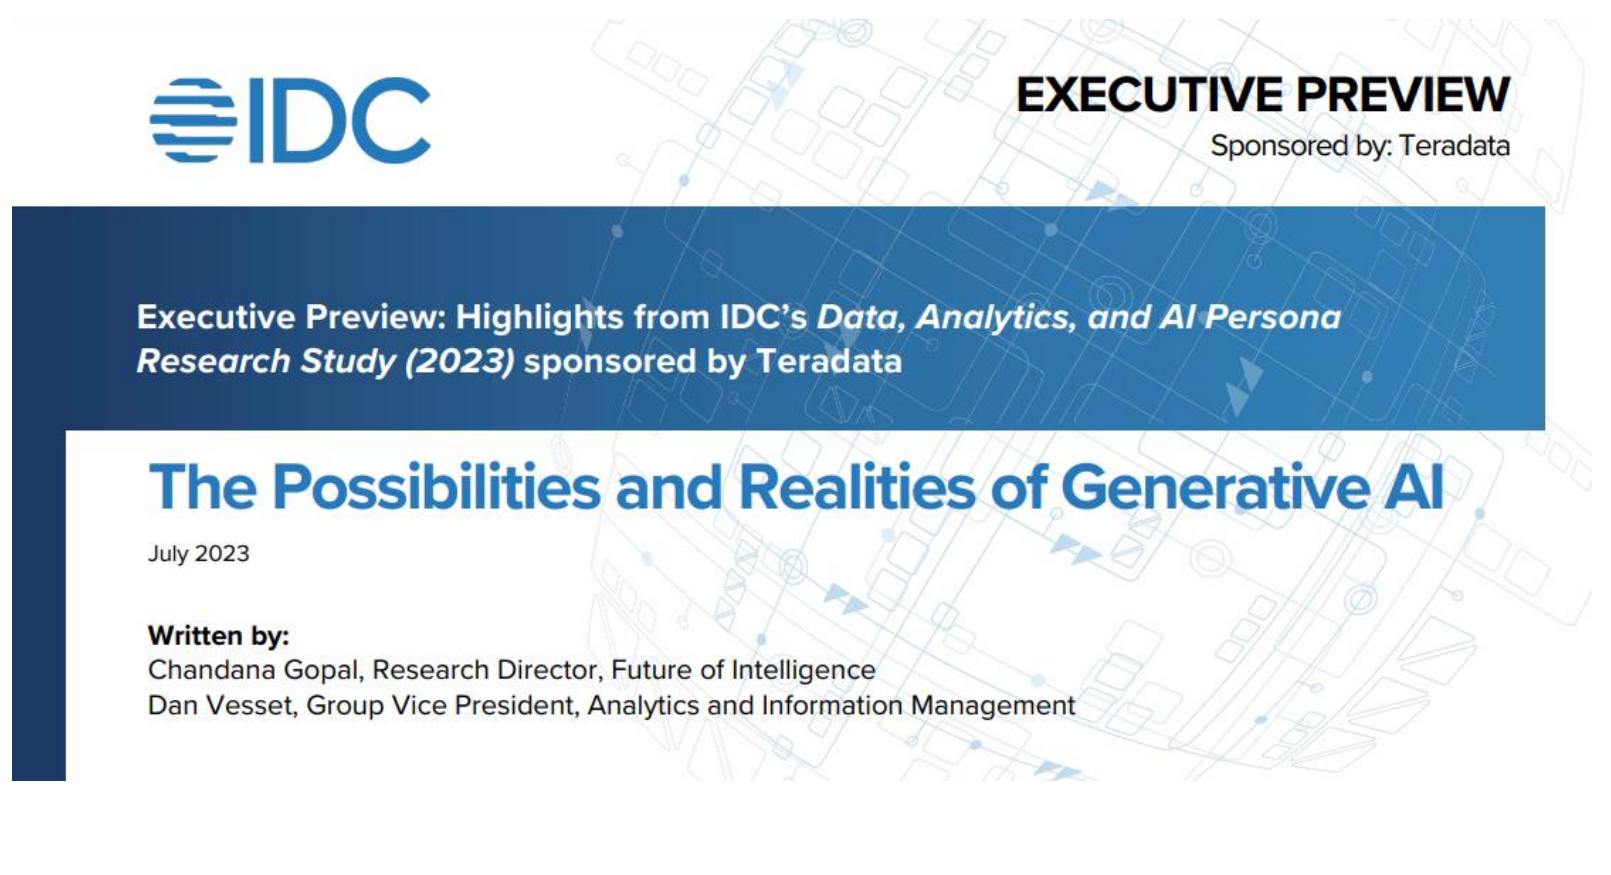 IDC: The Possibilities and Realities of Generative AI